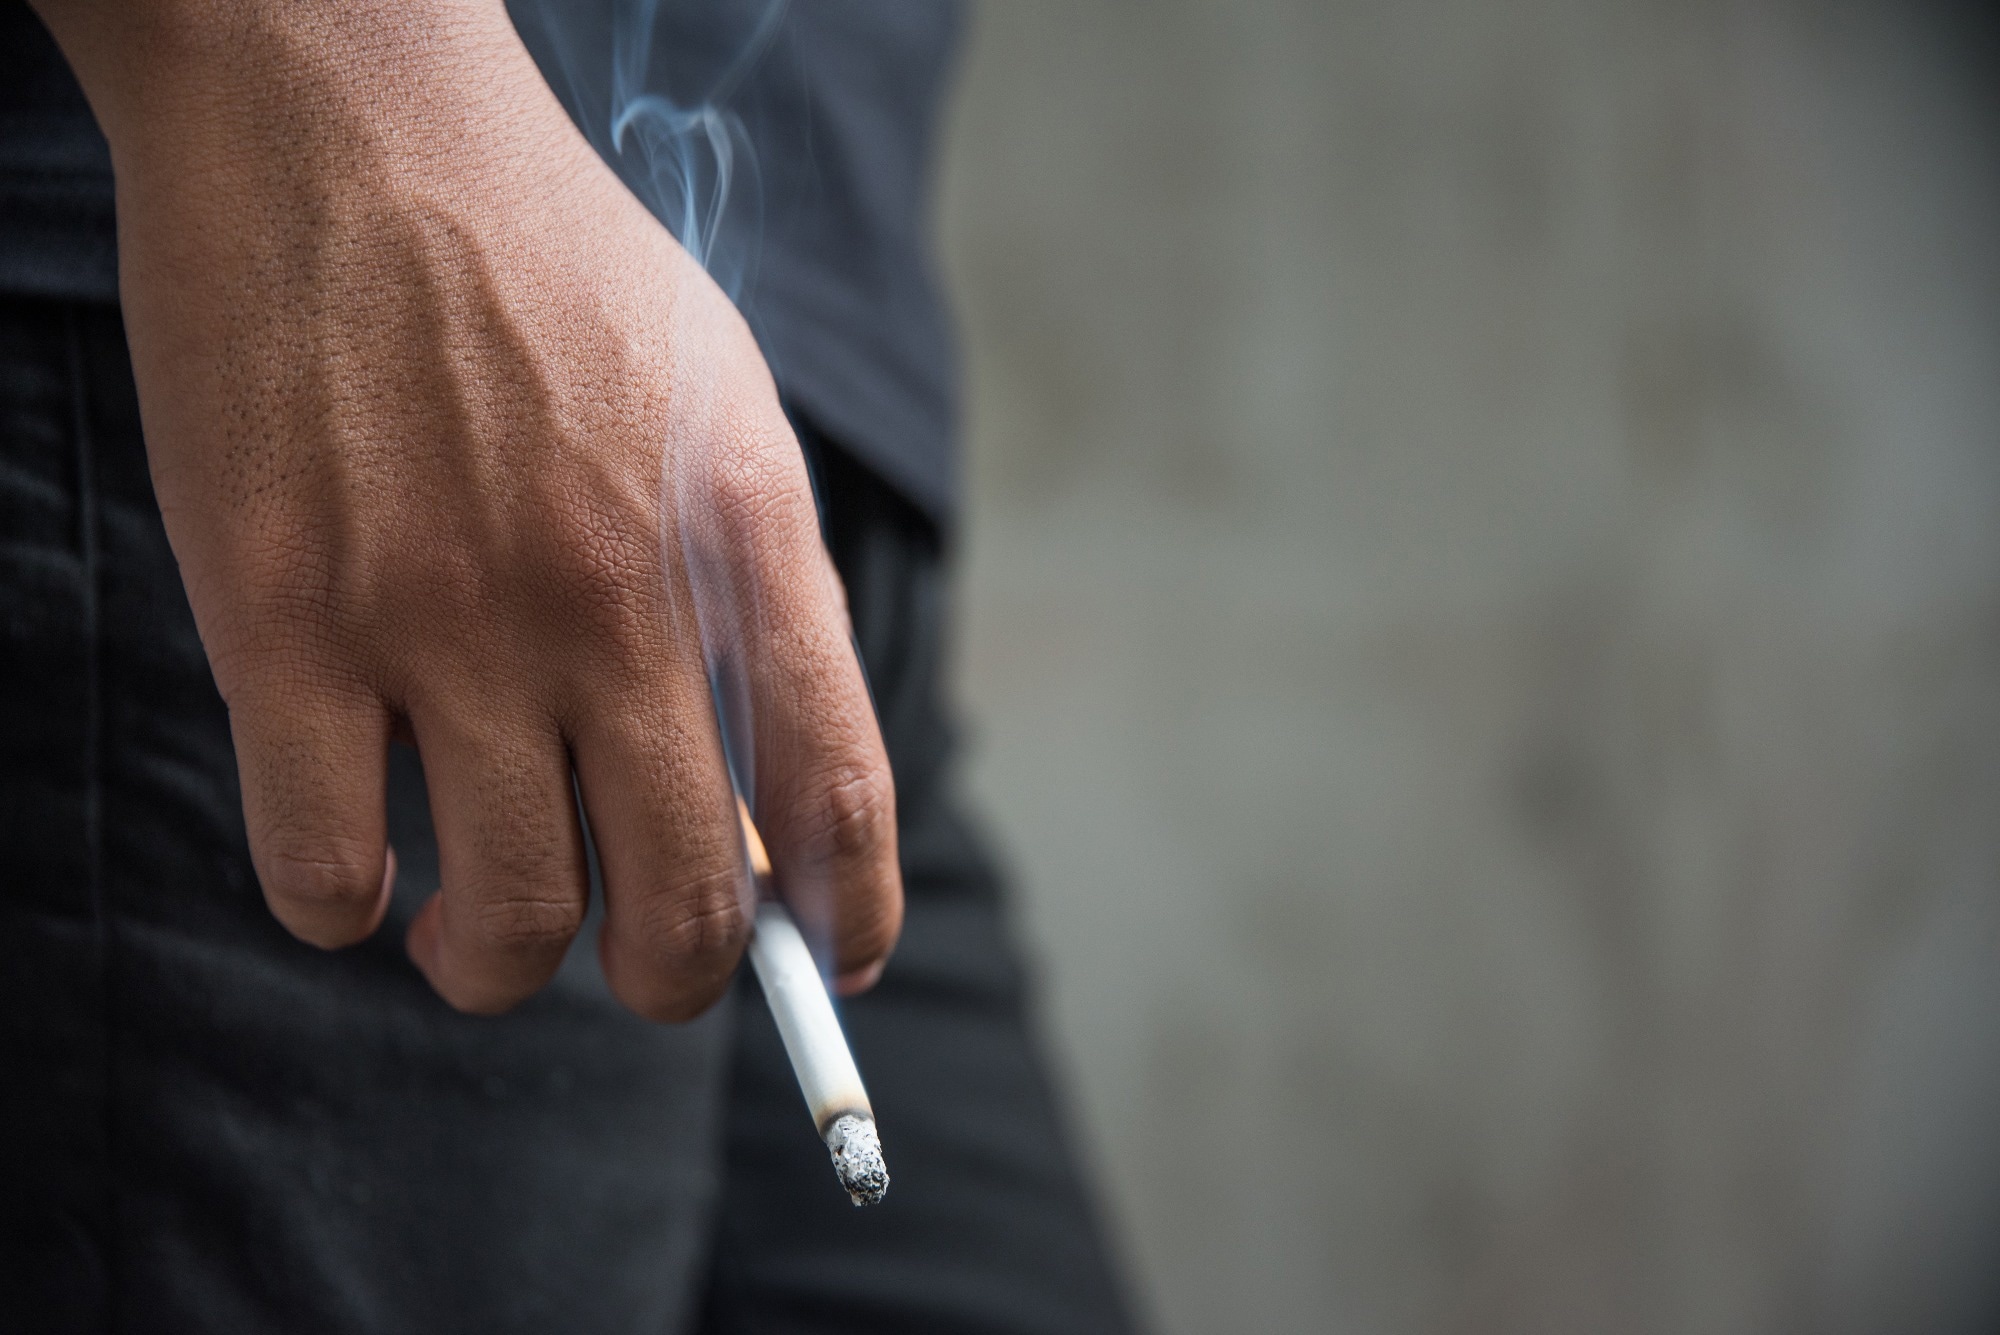 Effectiveness of behavior change interventions for smoking cessation among expectant and new fathers: findings from a systematic review